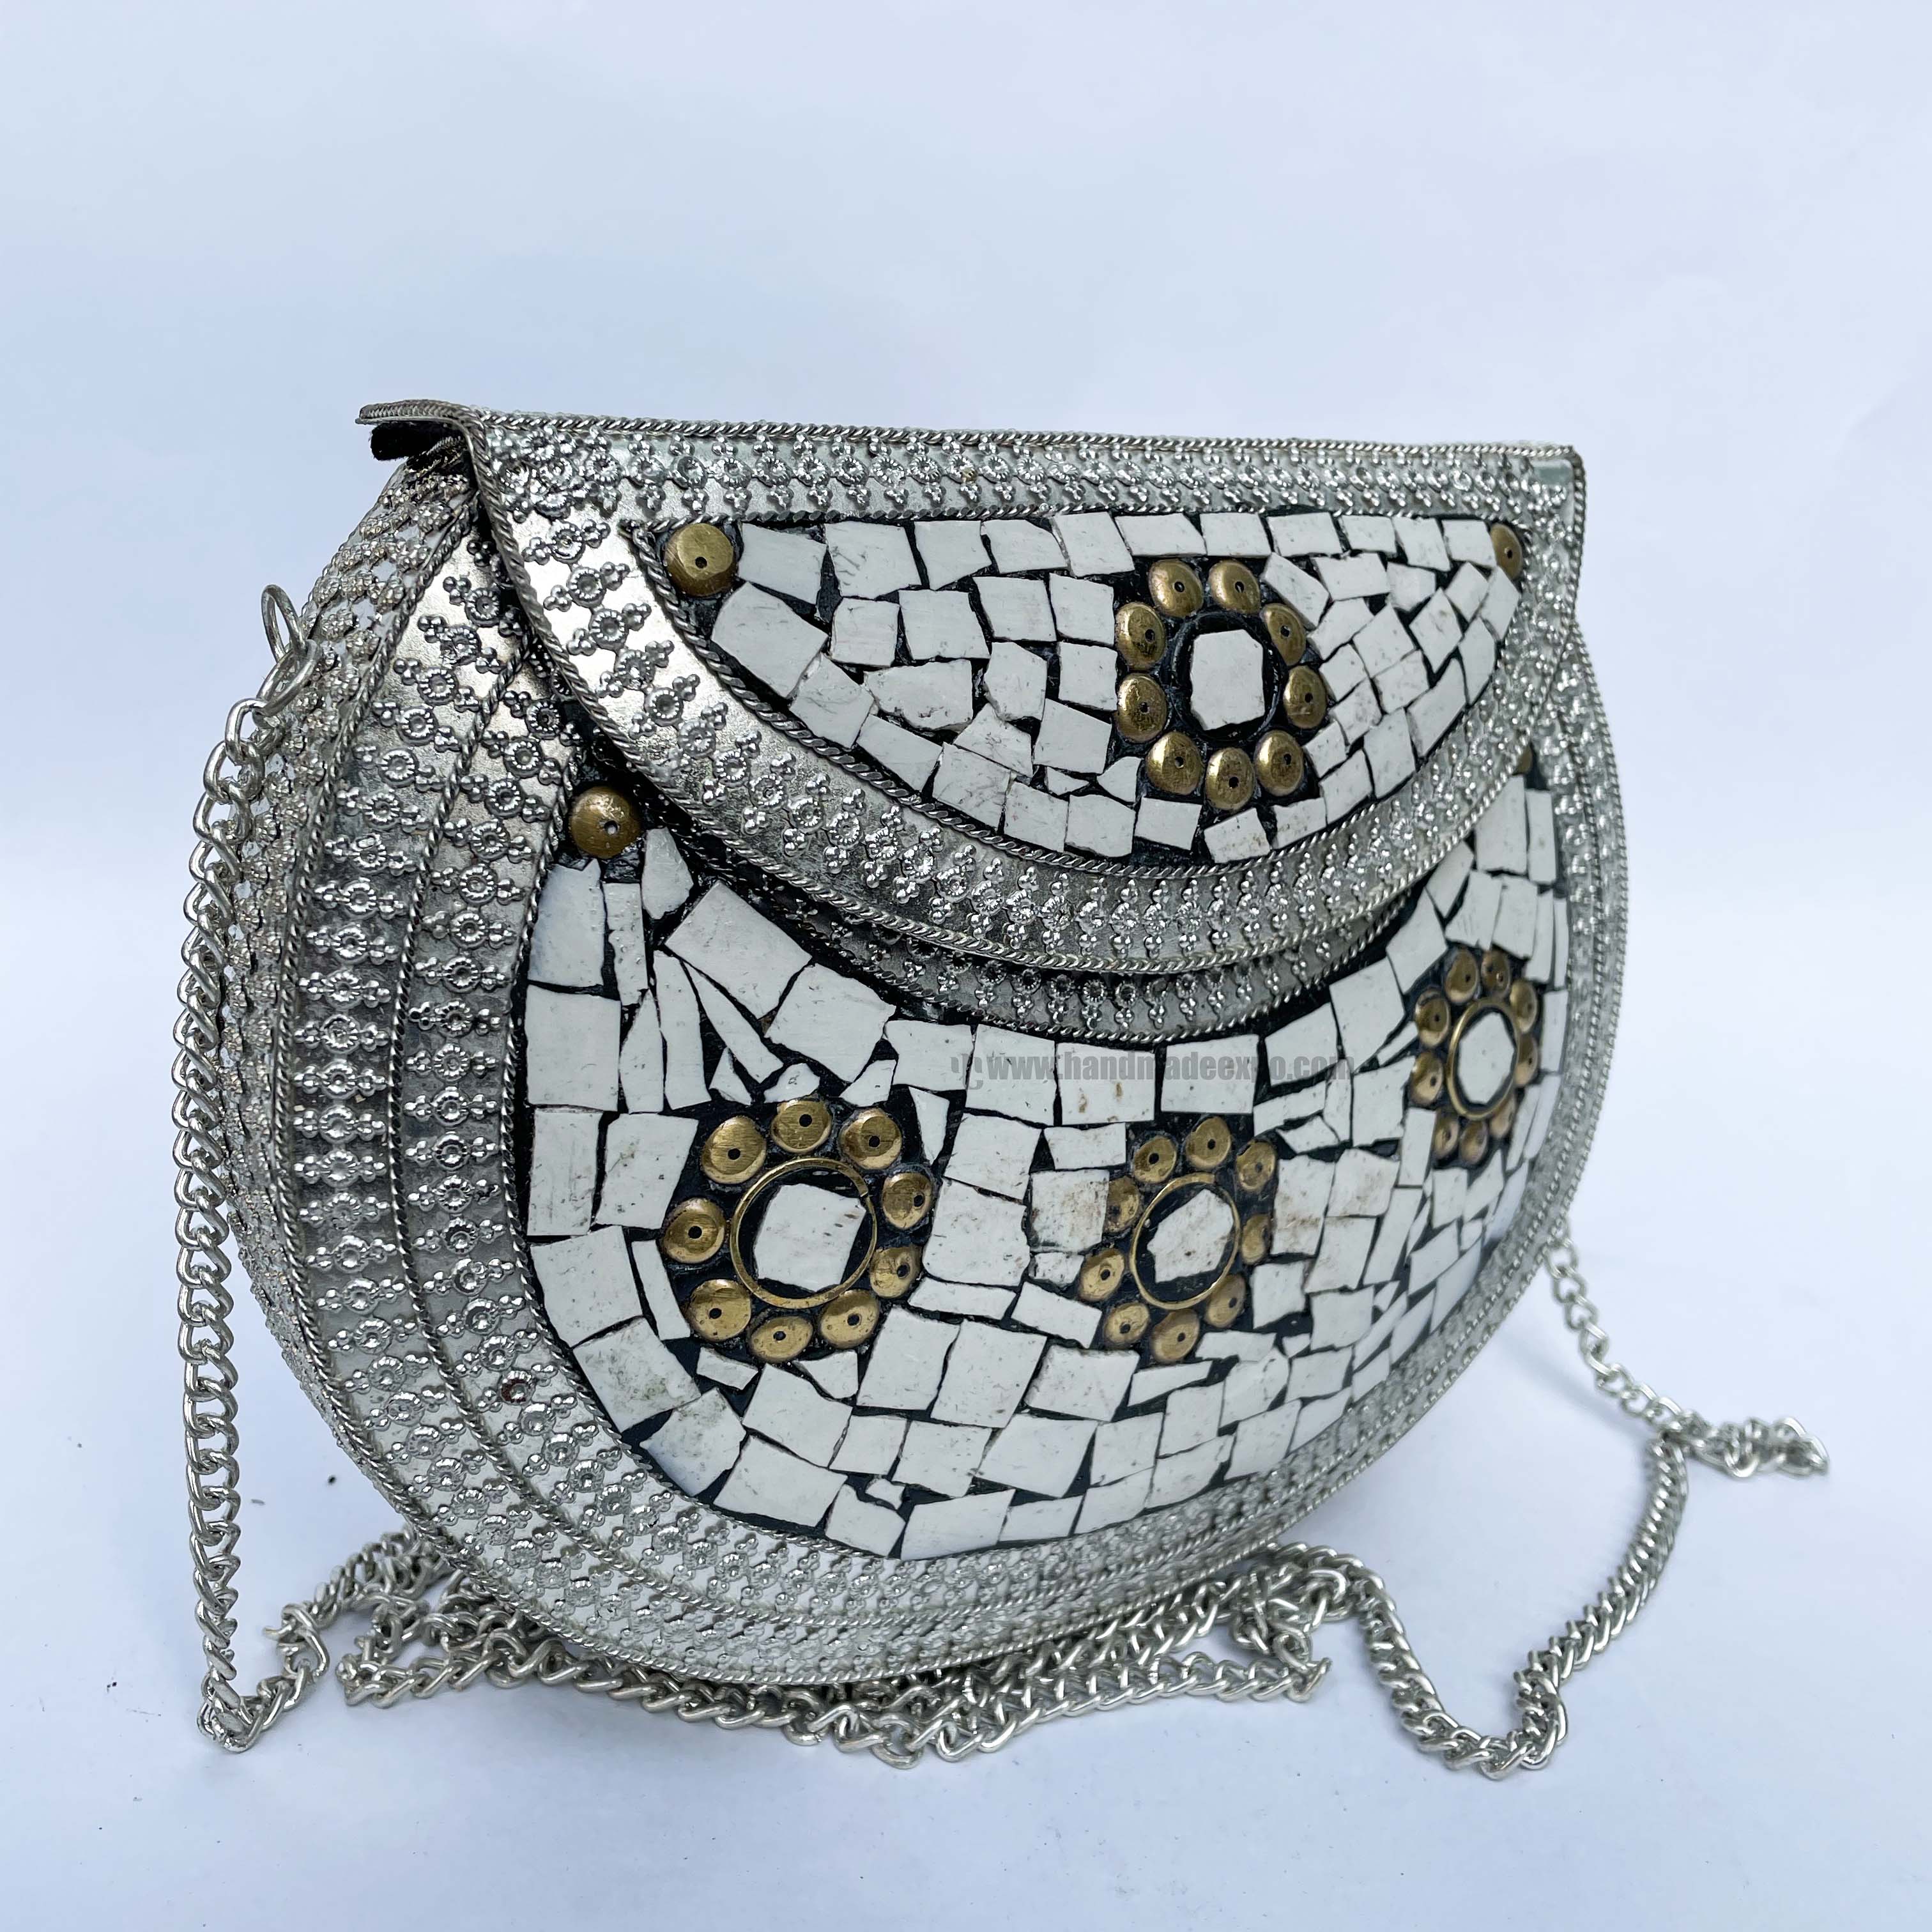 Nepali Handmade Big Ladies Bag With stone Setting, metal, silver And White Color